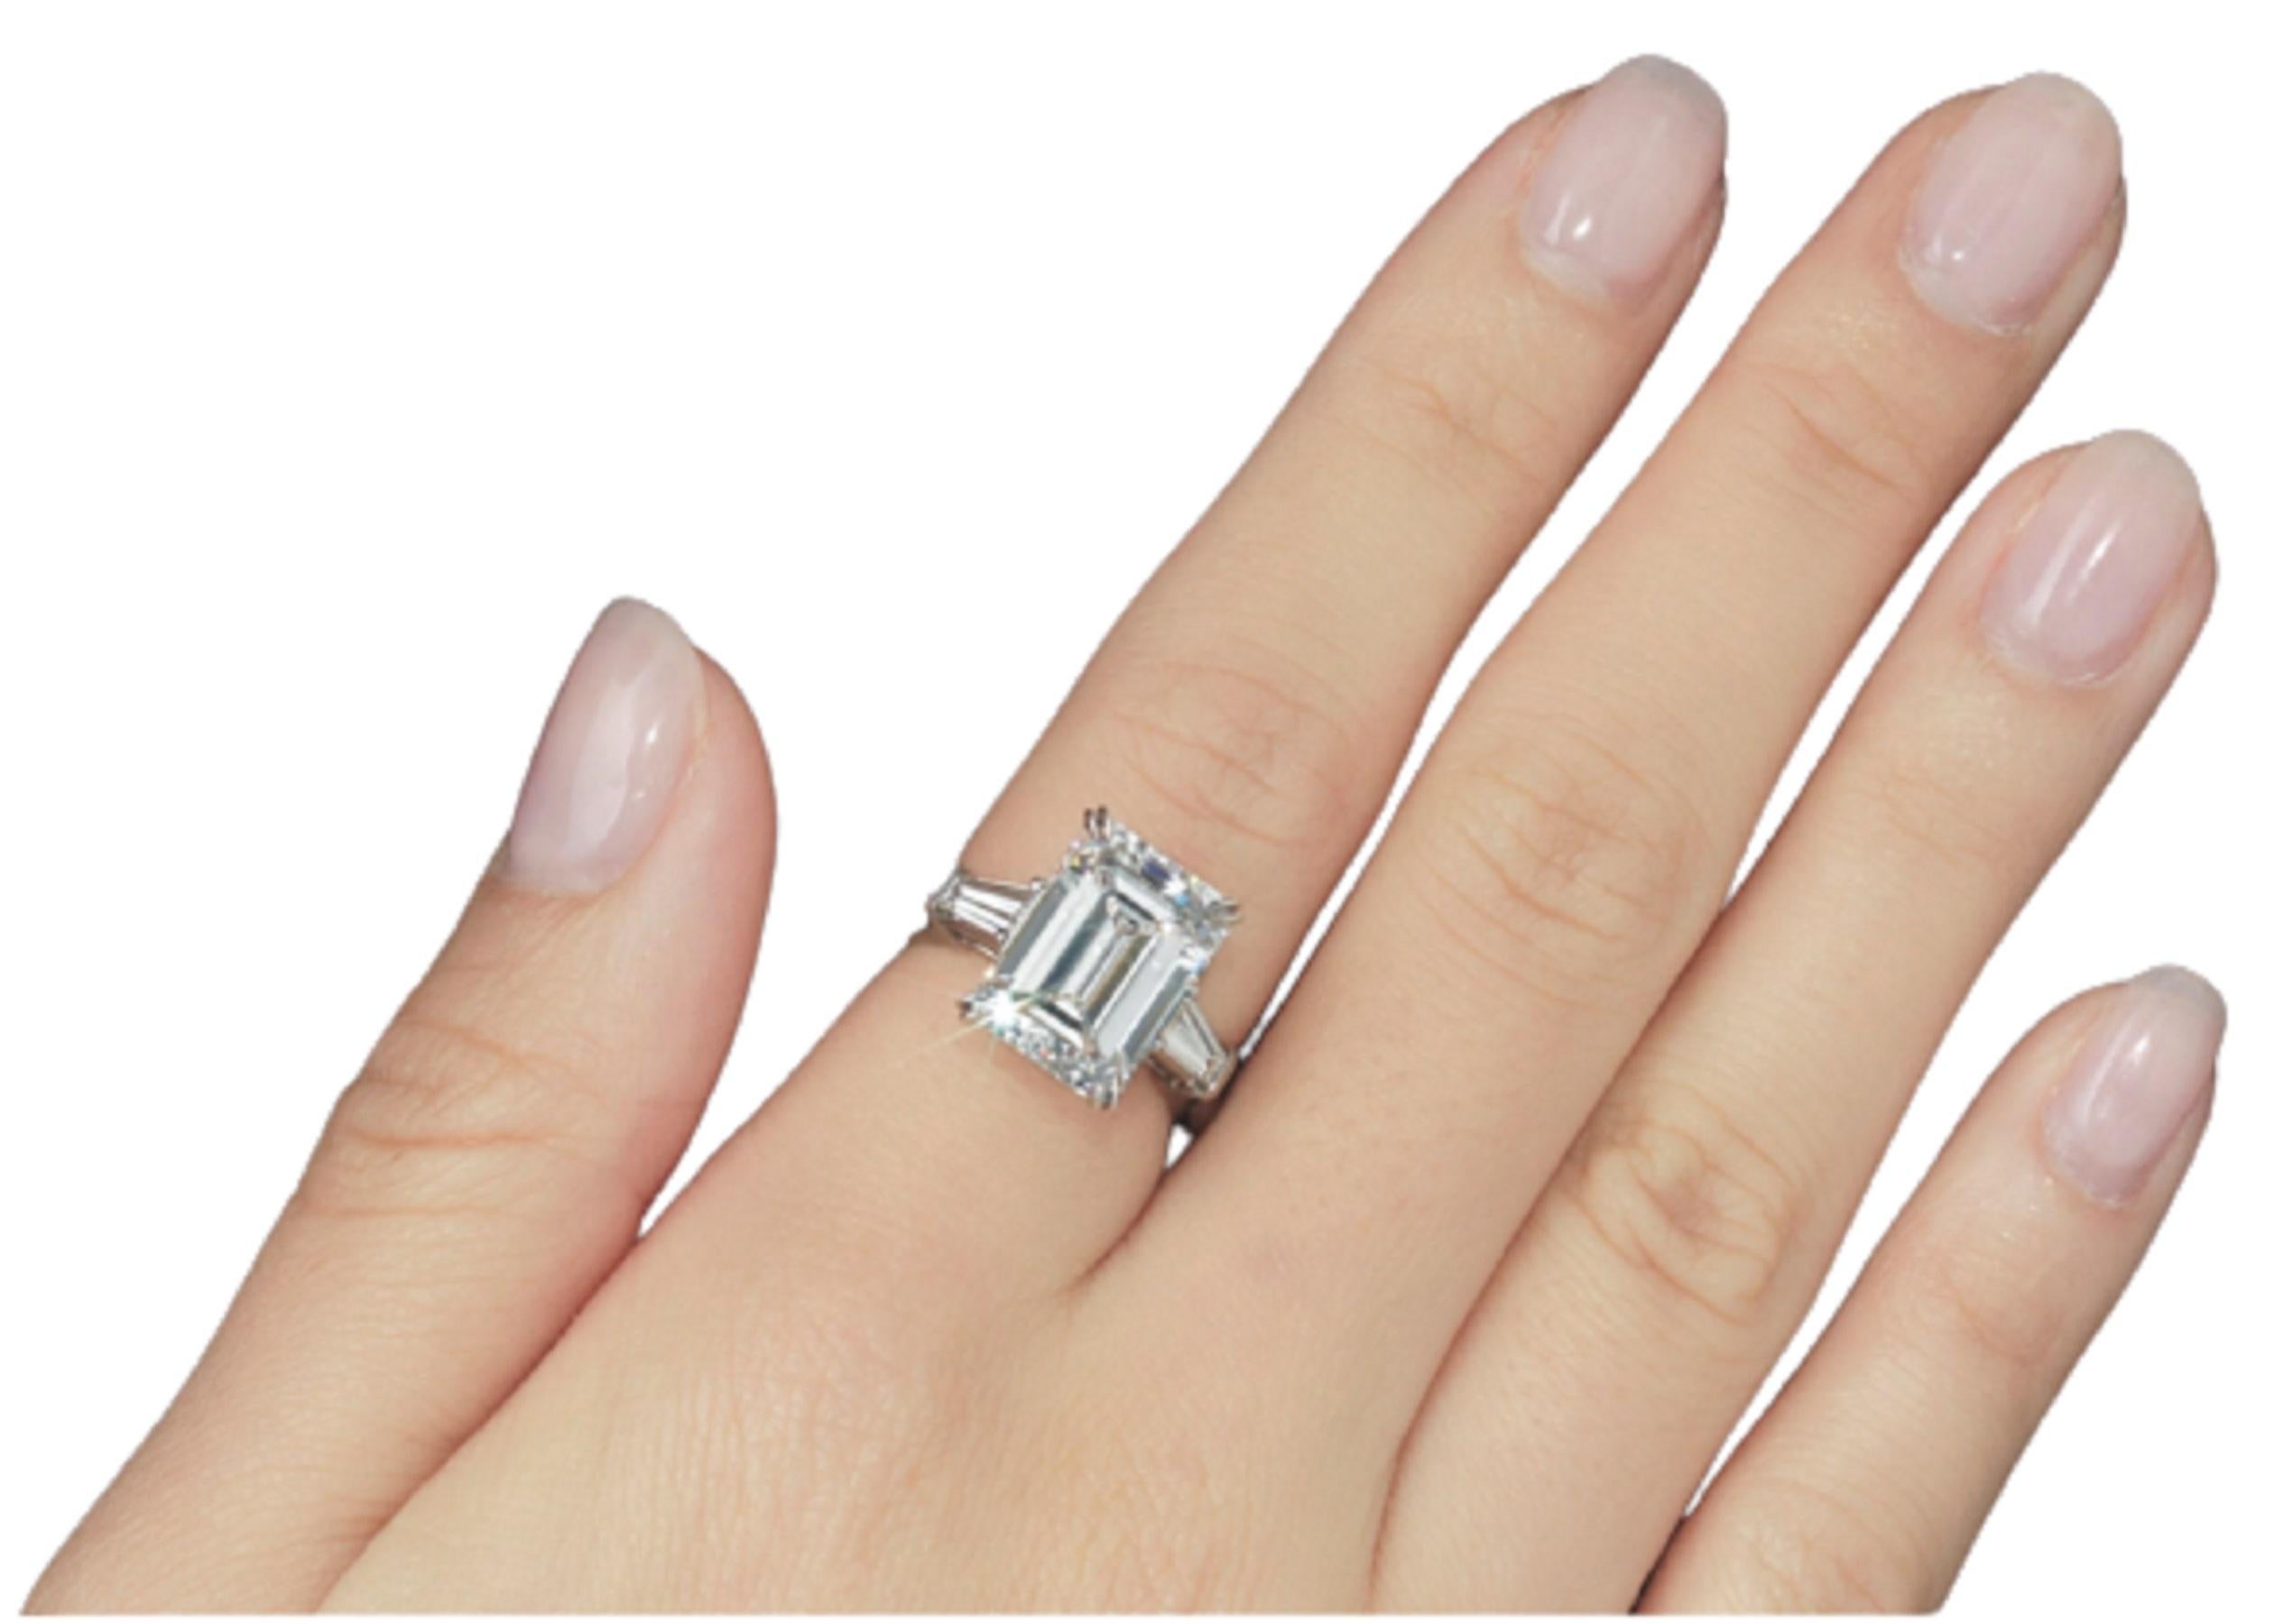 An exquisite emerald cut diamond ring composed by a main stone that weights 5 carats has an excellent proportion polish and symmetry. The side stones are tapered baguettes also very pure and white

The ring is set in solid platinum 